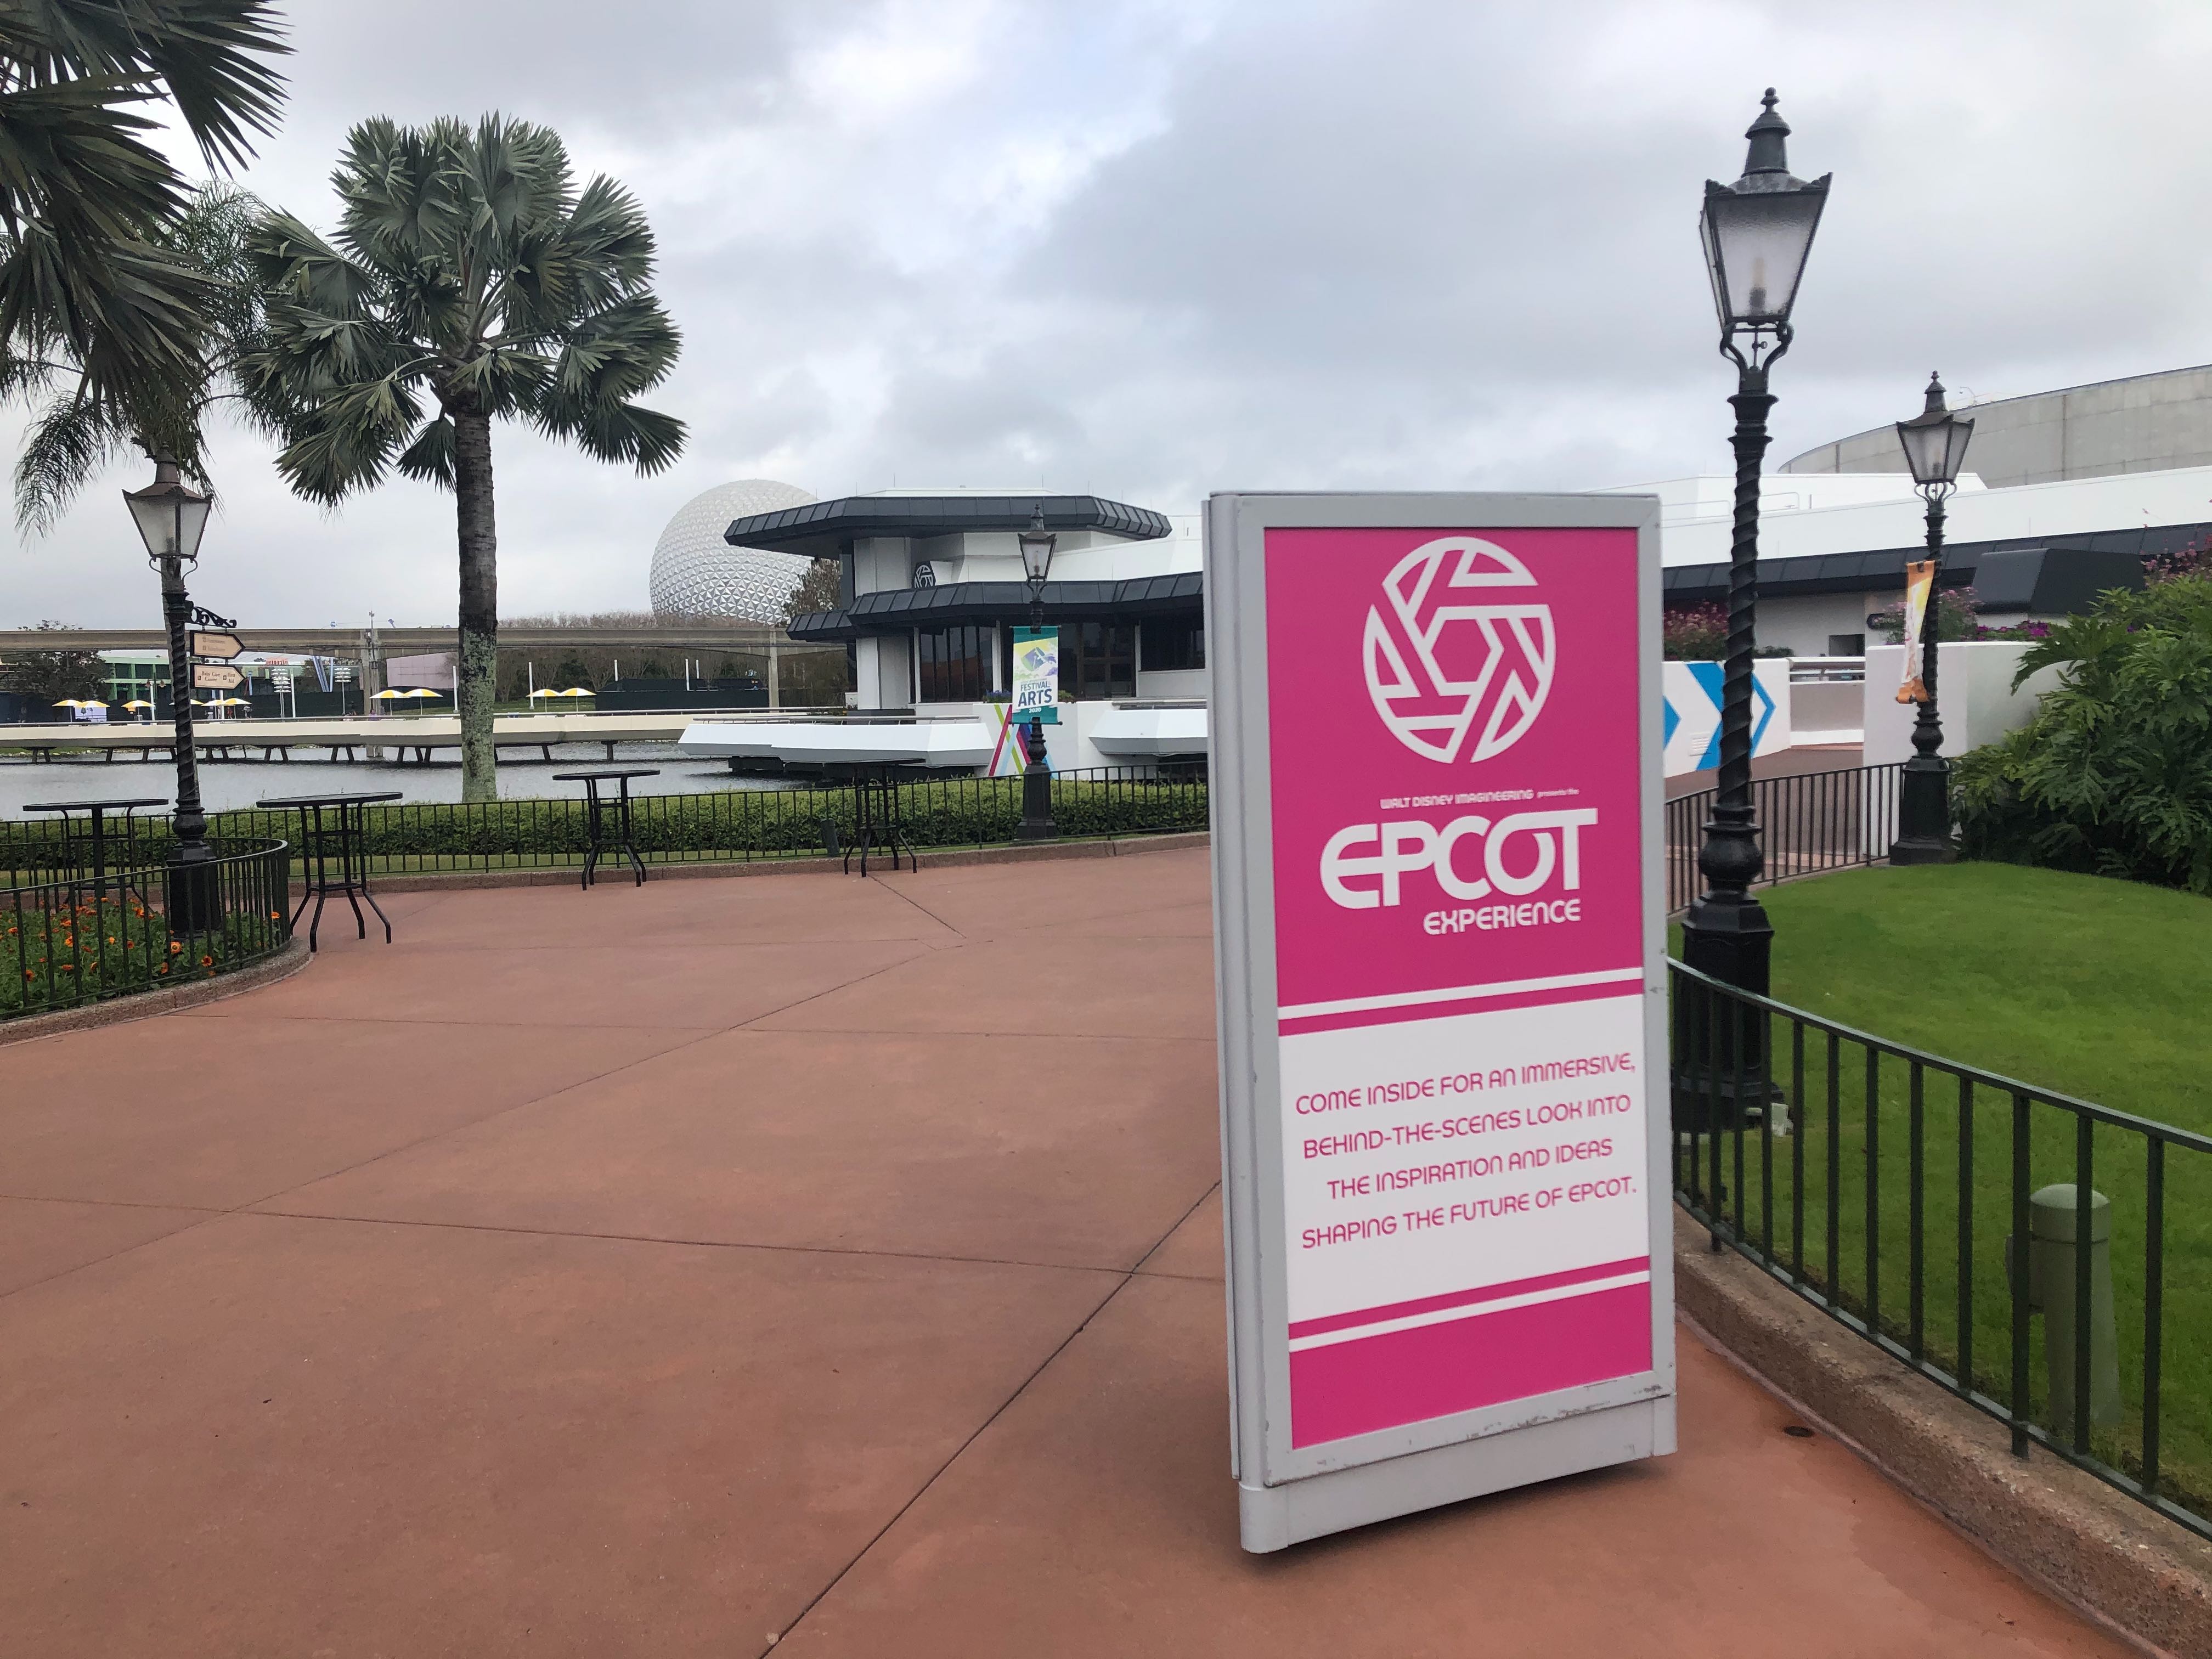 PHOTOS: Eats at the EPCOT Experience Bites and Beverages Menu Revealed